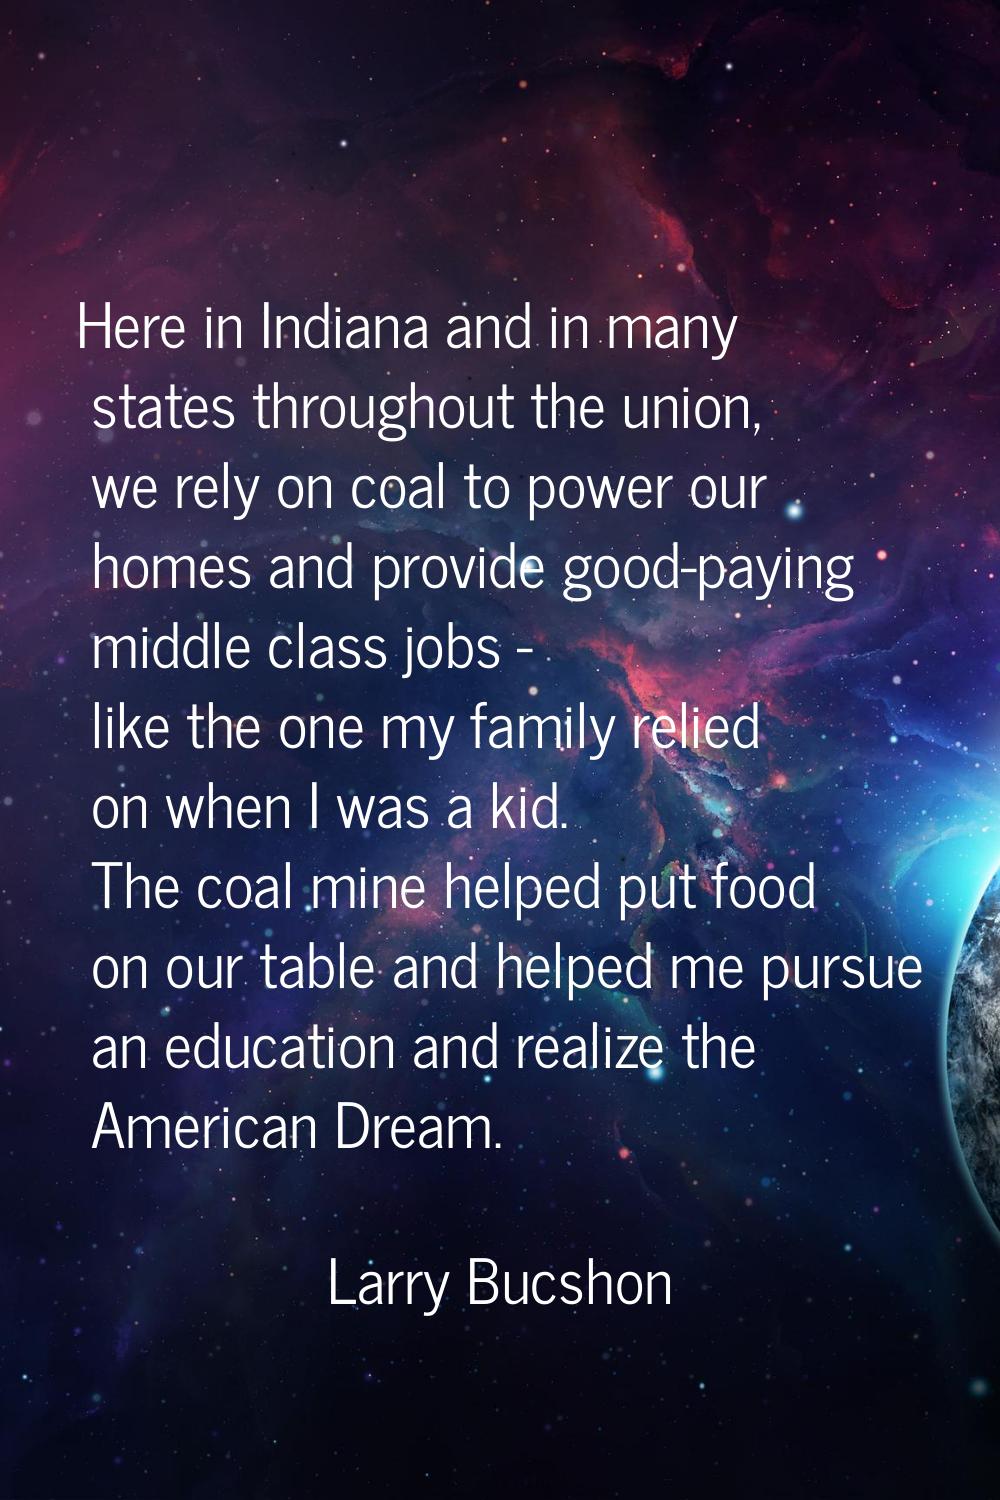 Here in Indiana and in many states throughout the union, we rely on coal to power our homes and pro